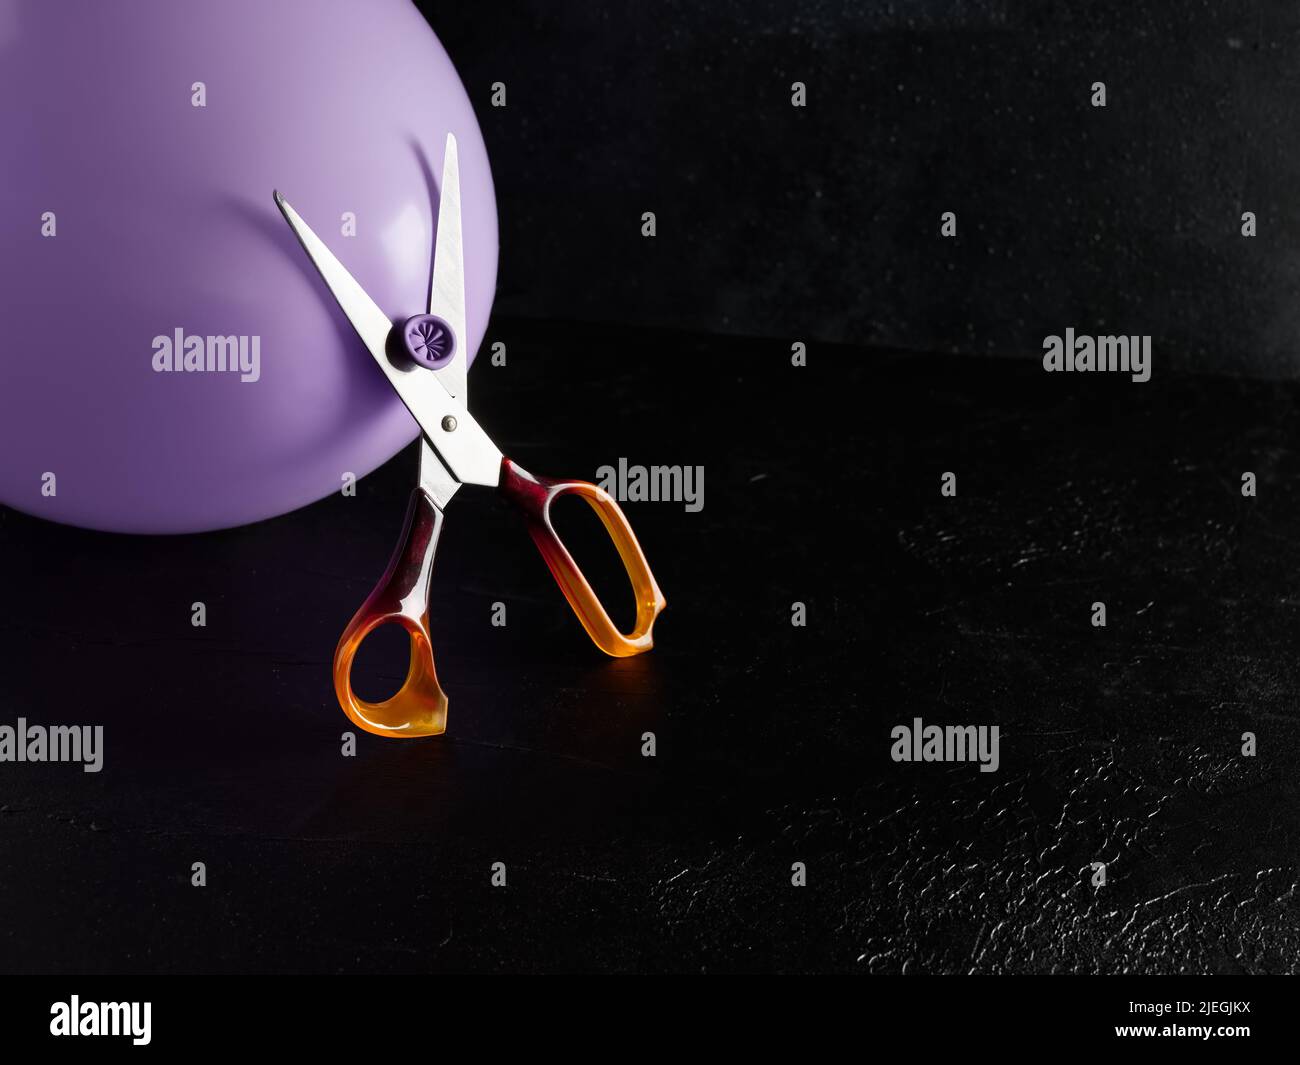 Scissors cutting the purple balloon against moody dark black background. Risk, insurance, danger or emotional pressure concepts Stock Photo